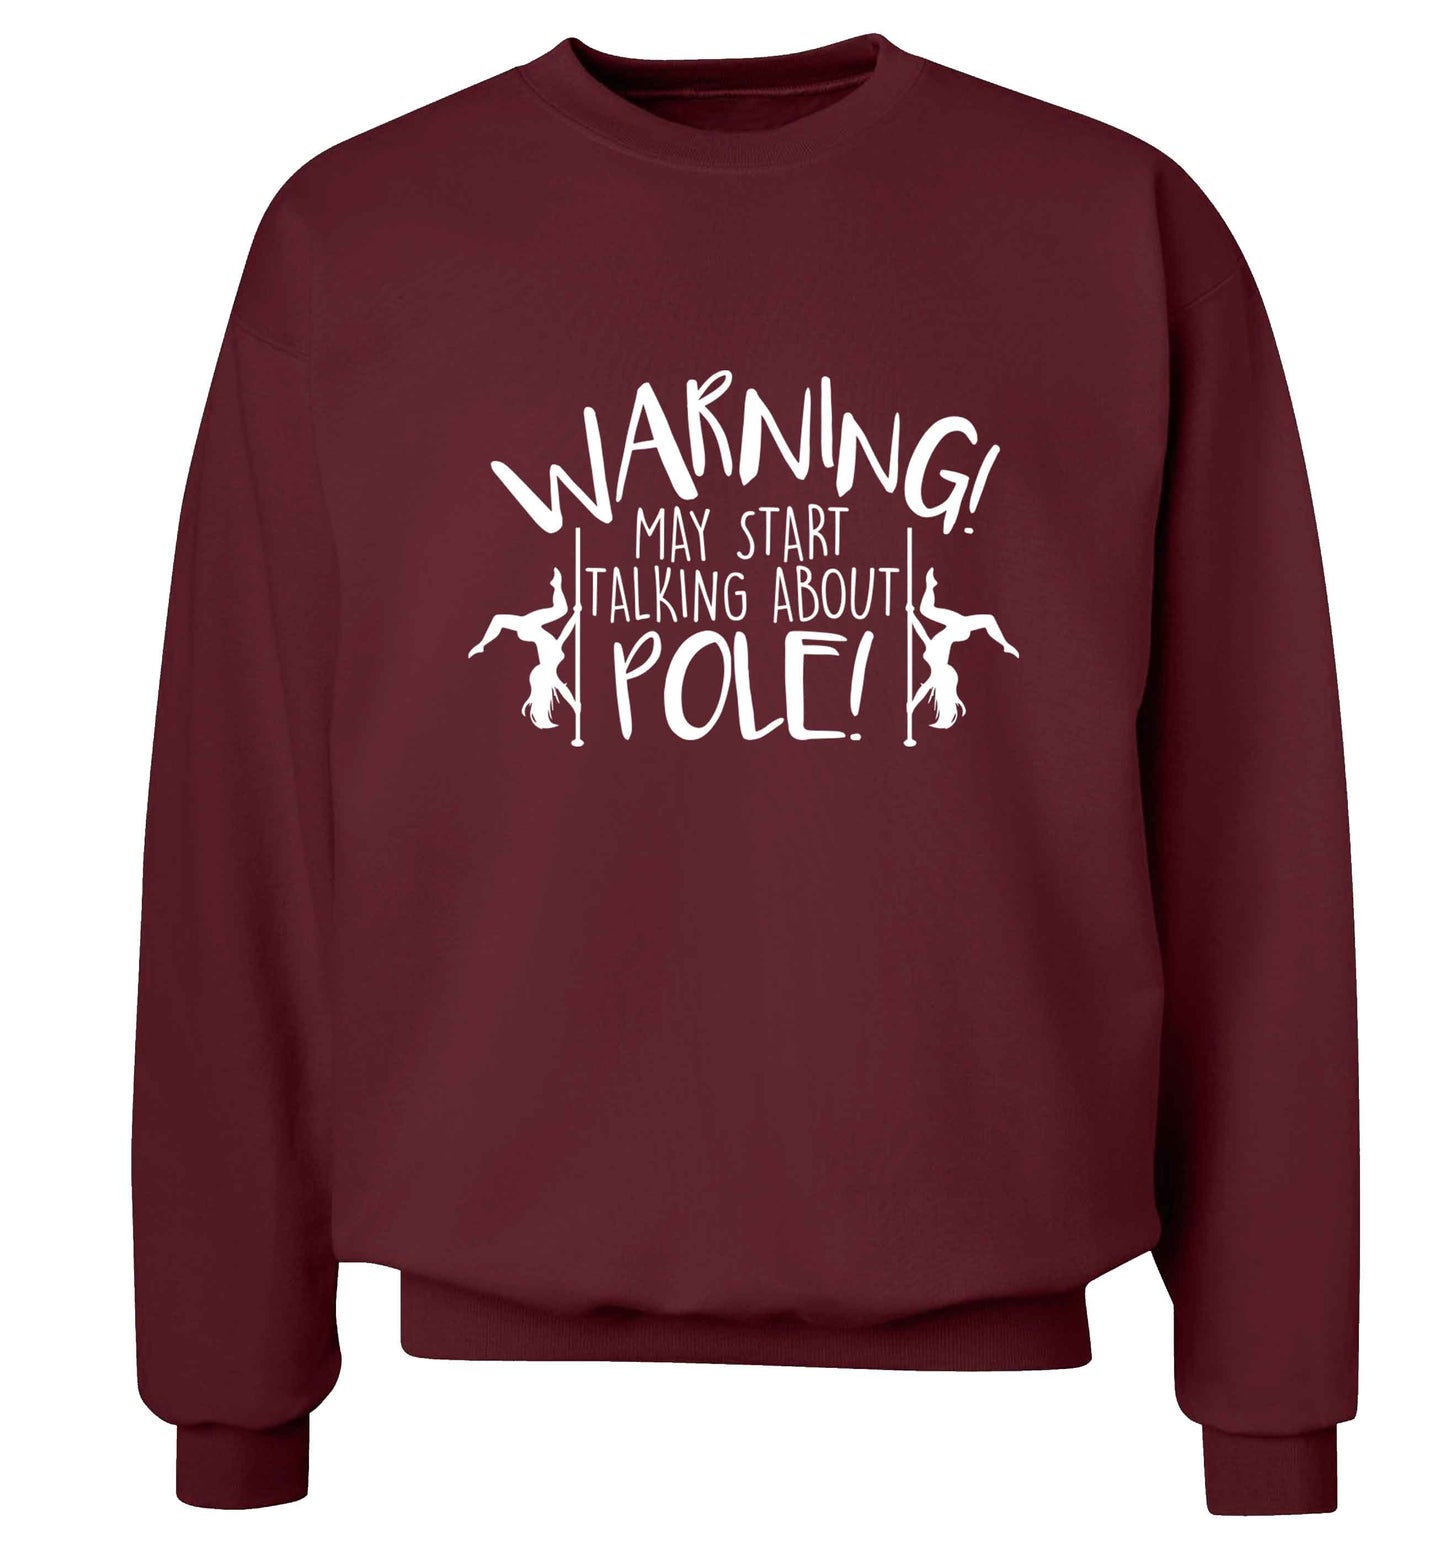 Warning may start talking about pole  adult's unisex maroon sweater 2XL